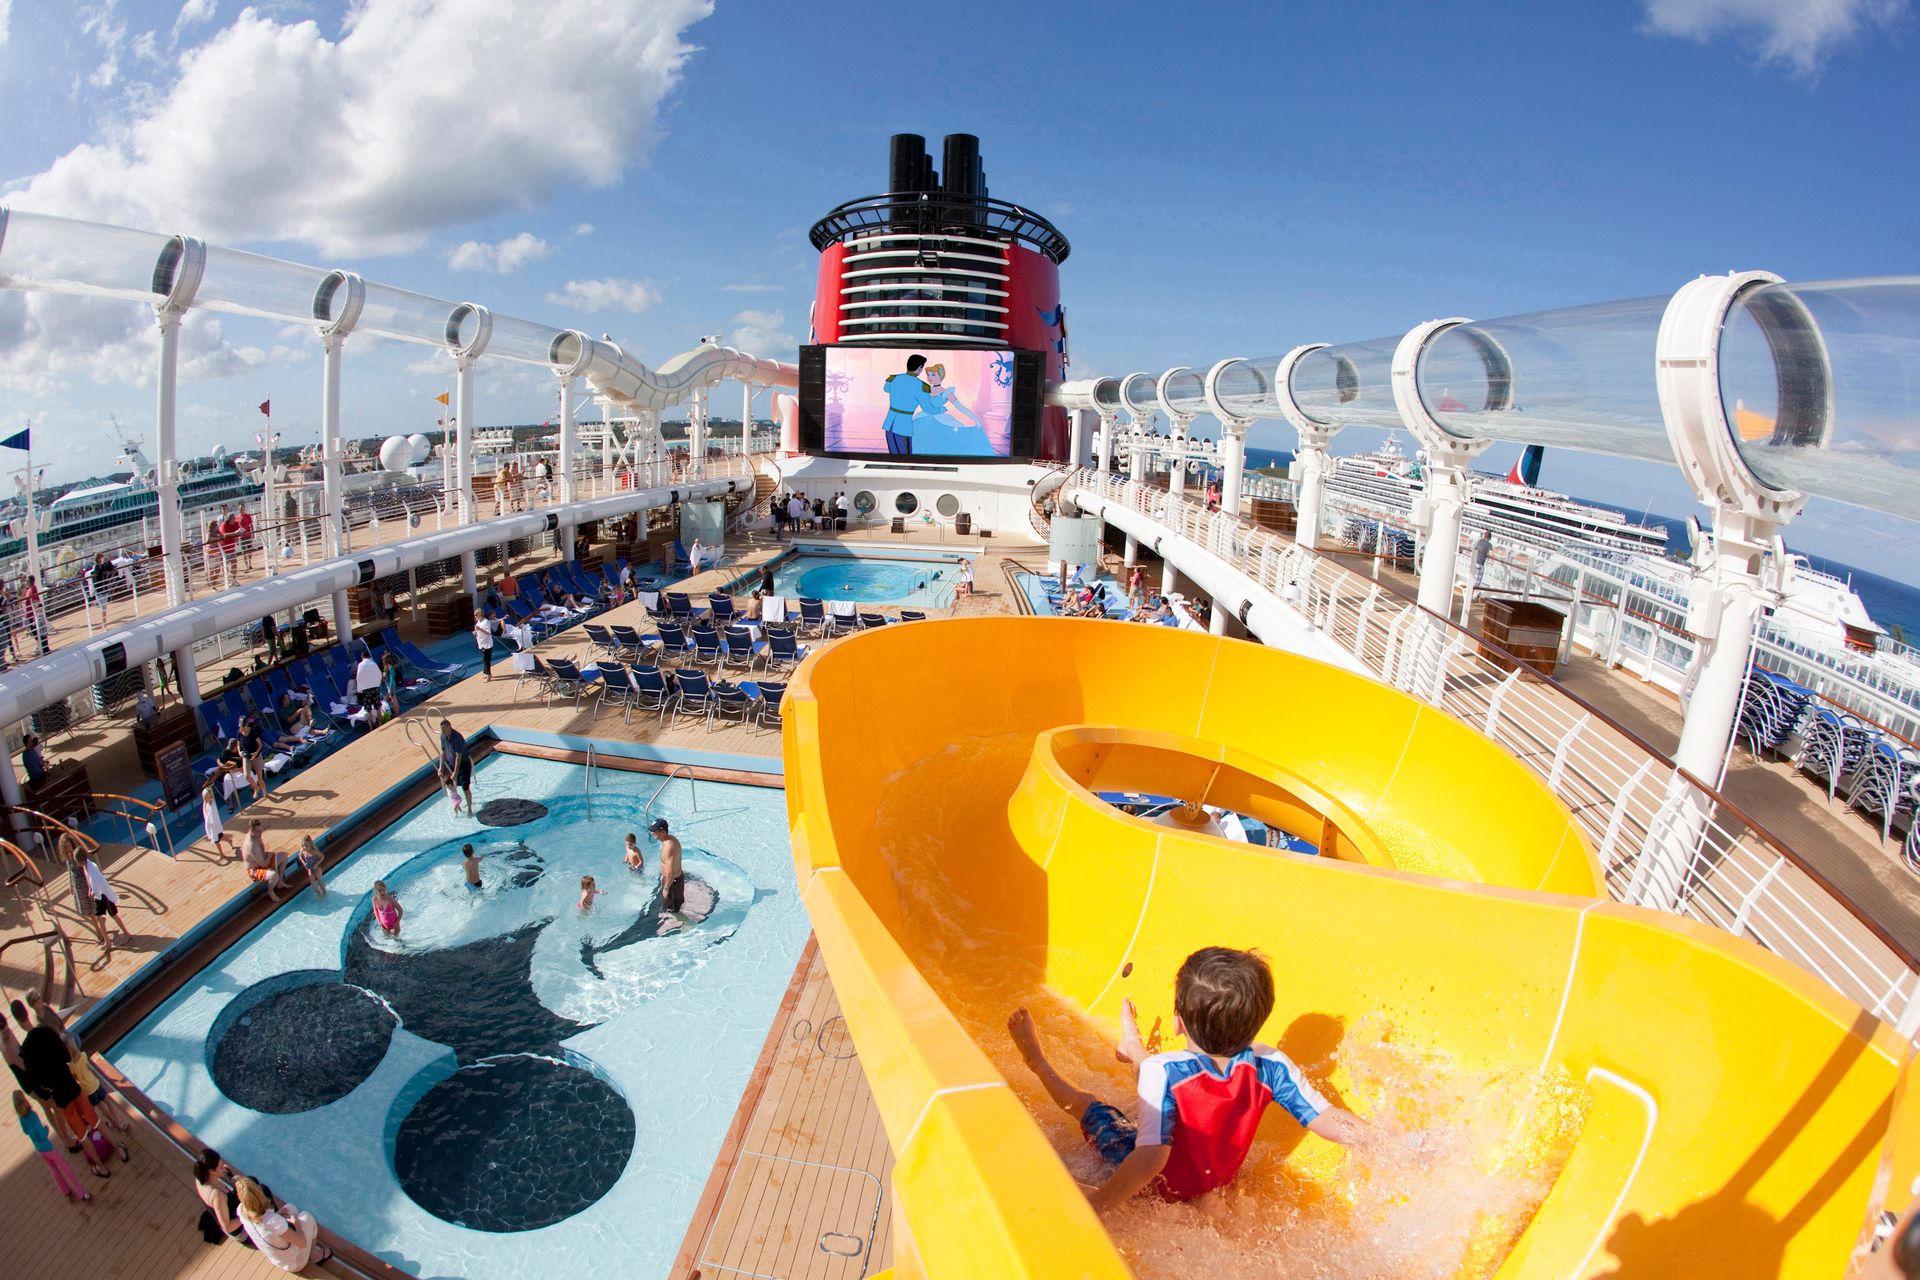 2 New Disney Cruise Ships Coming To Port Canaveral